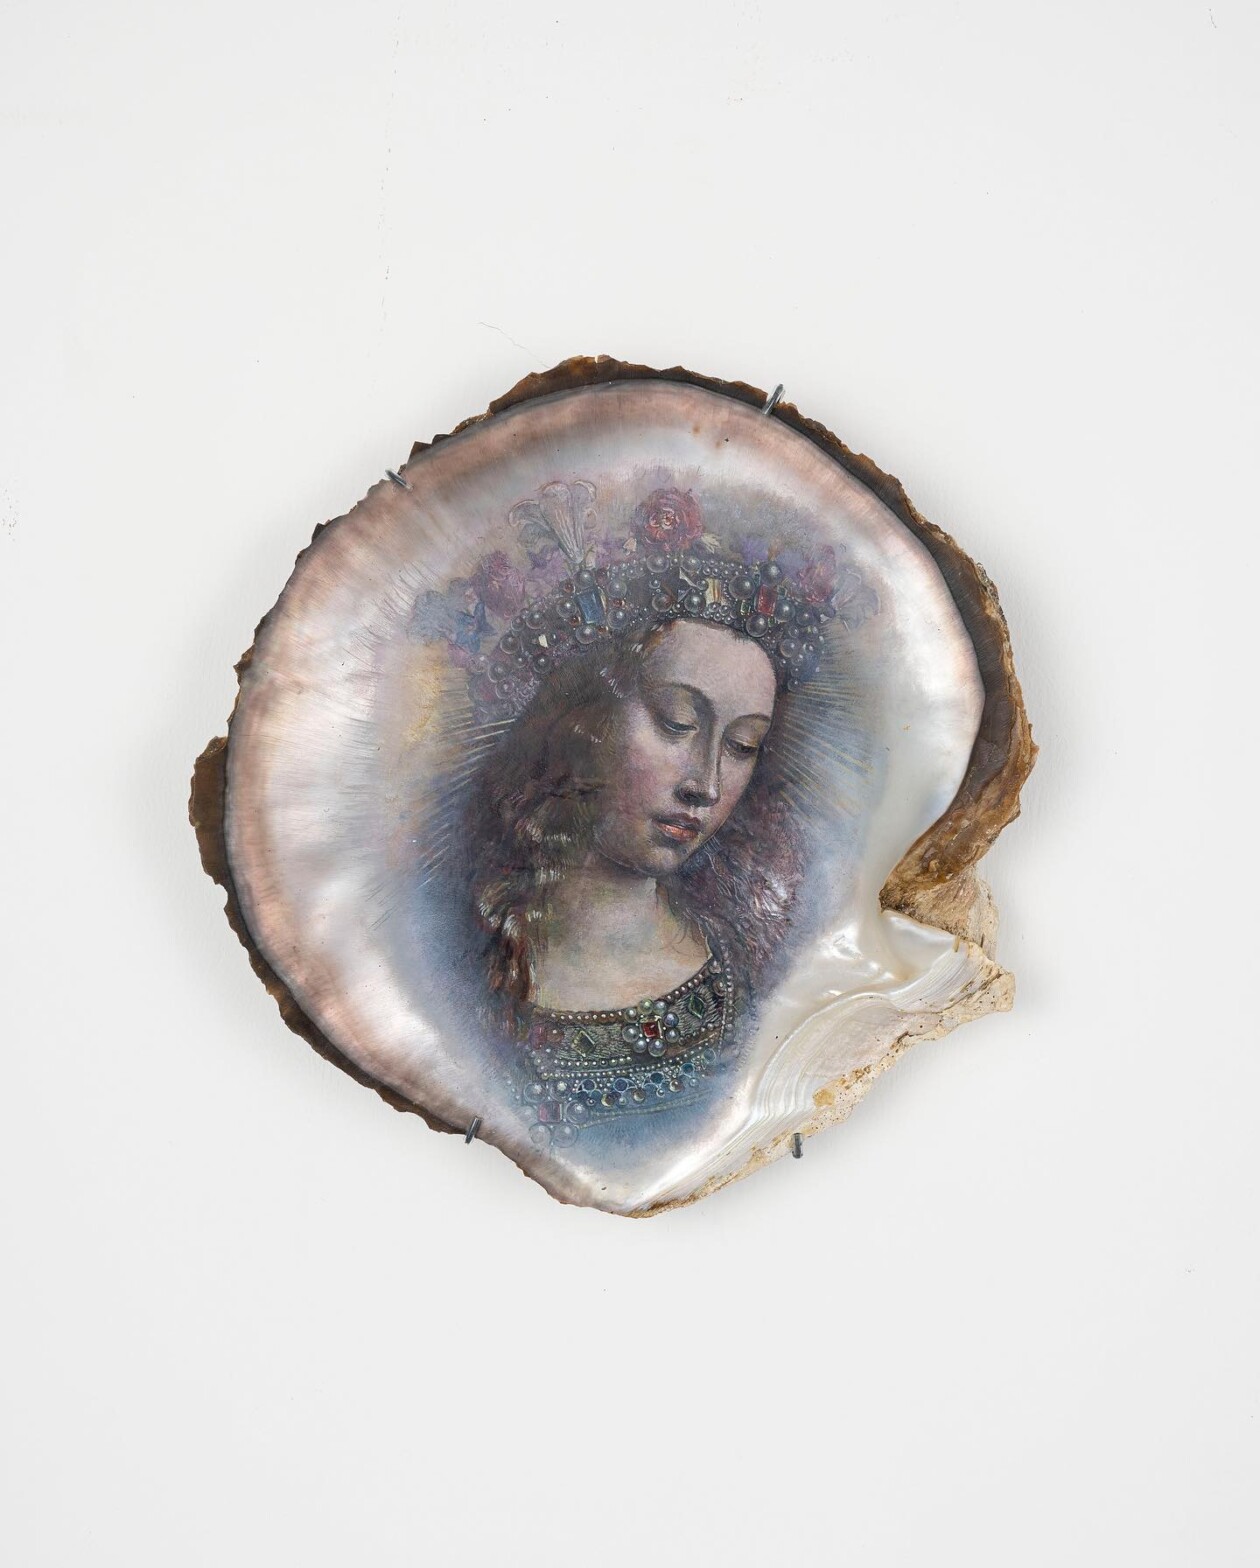 Renaissance Paintings Beautifully Recreated On Natural Materials By Chris Oh (16)